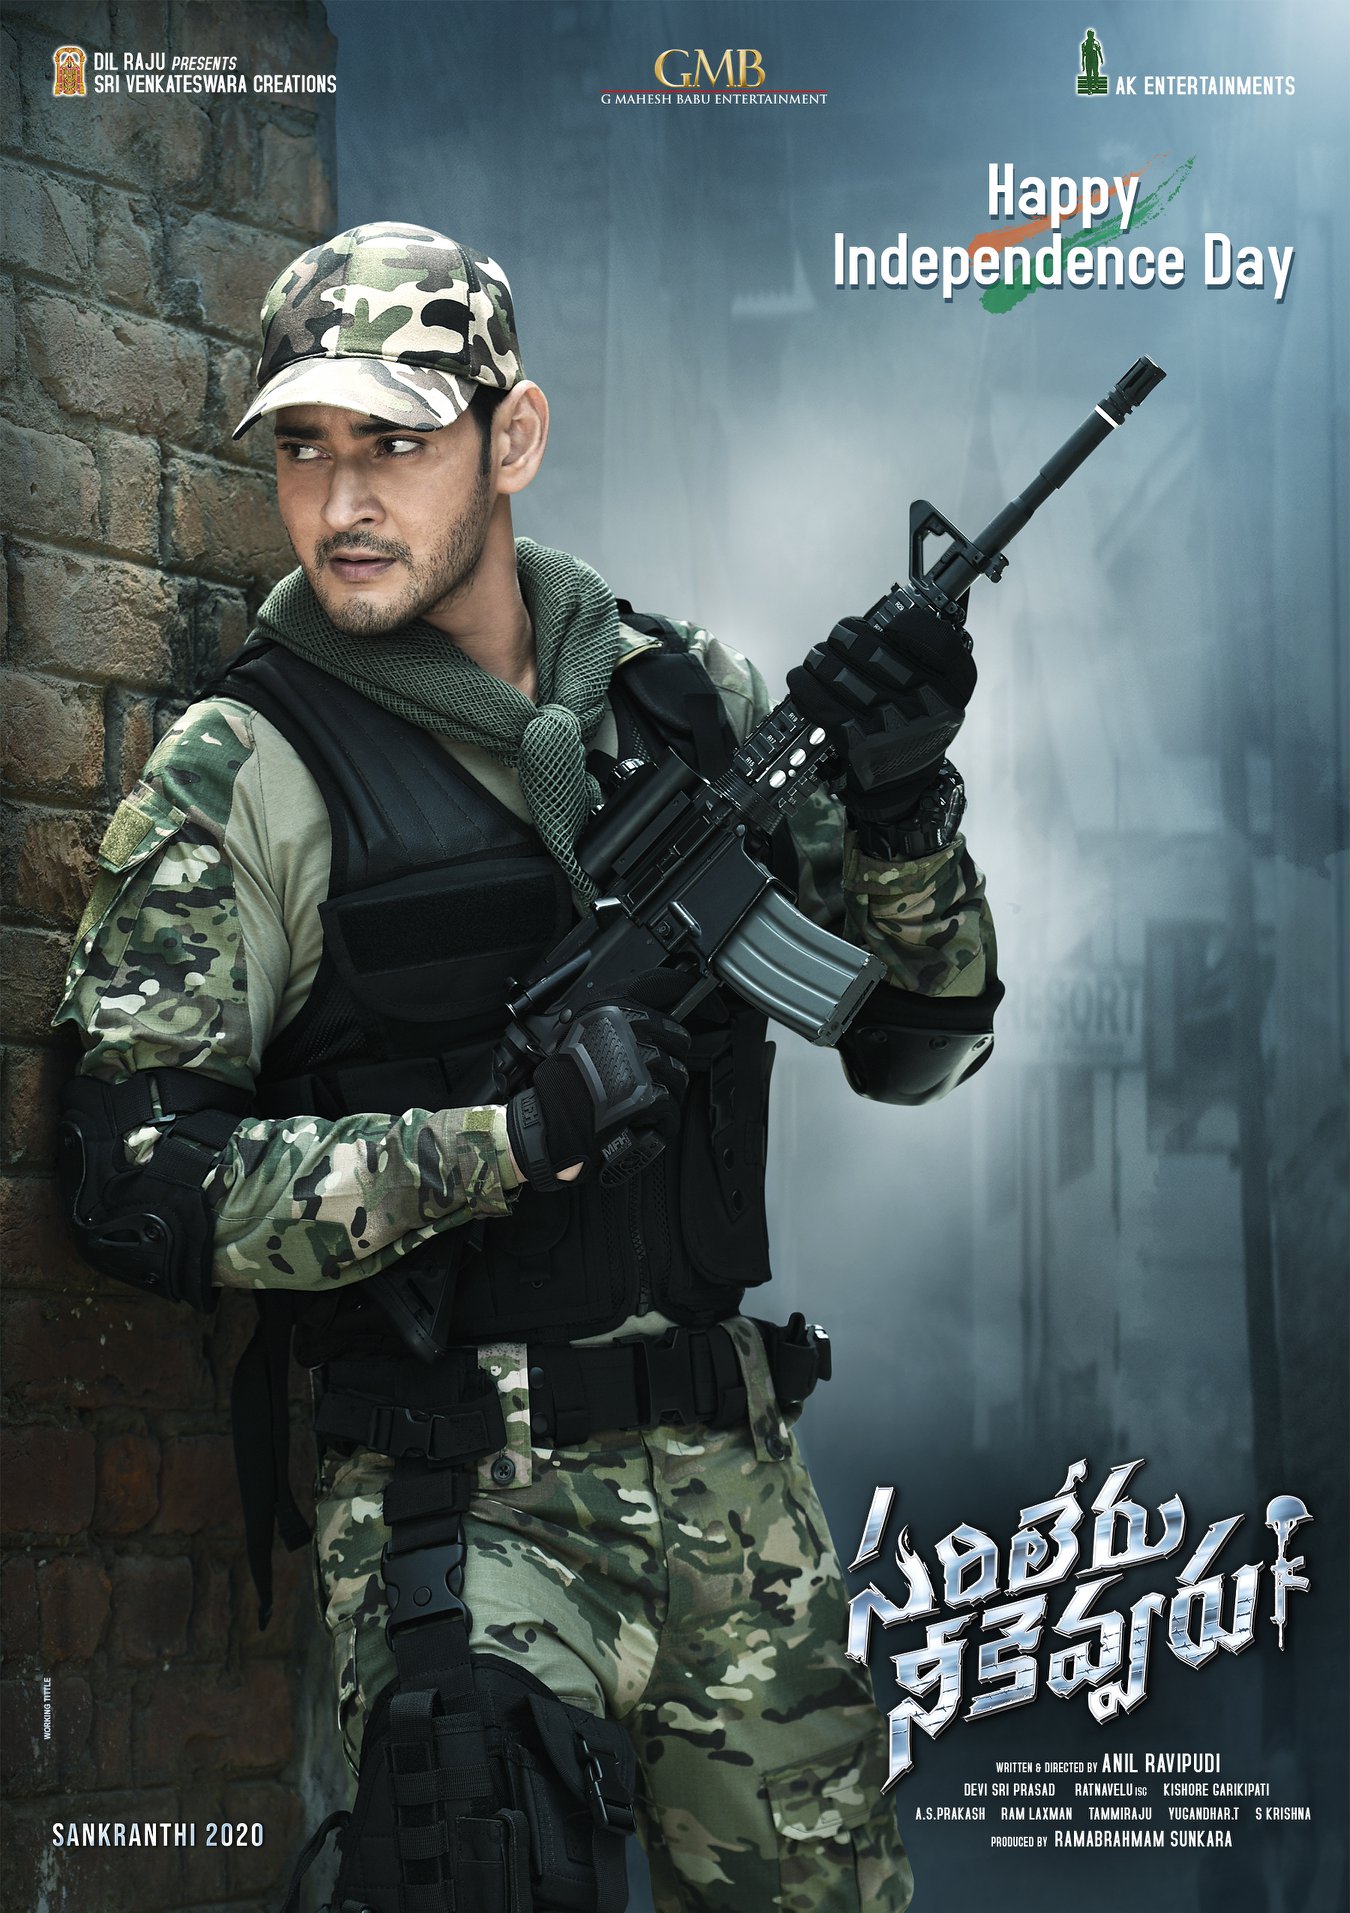 mahesh wallpapers hd,soldier,action adventure game,army,shooter game,movie